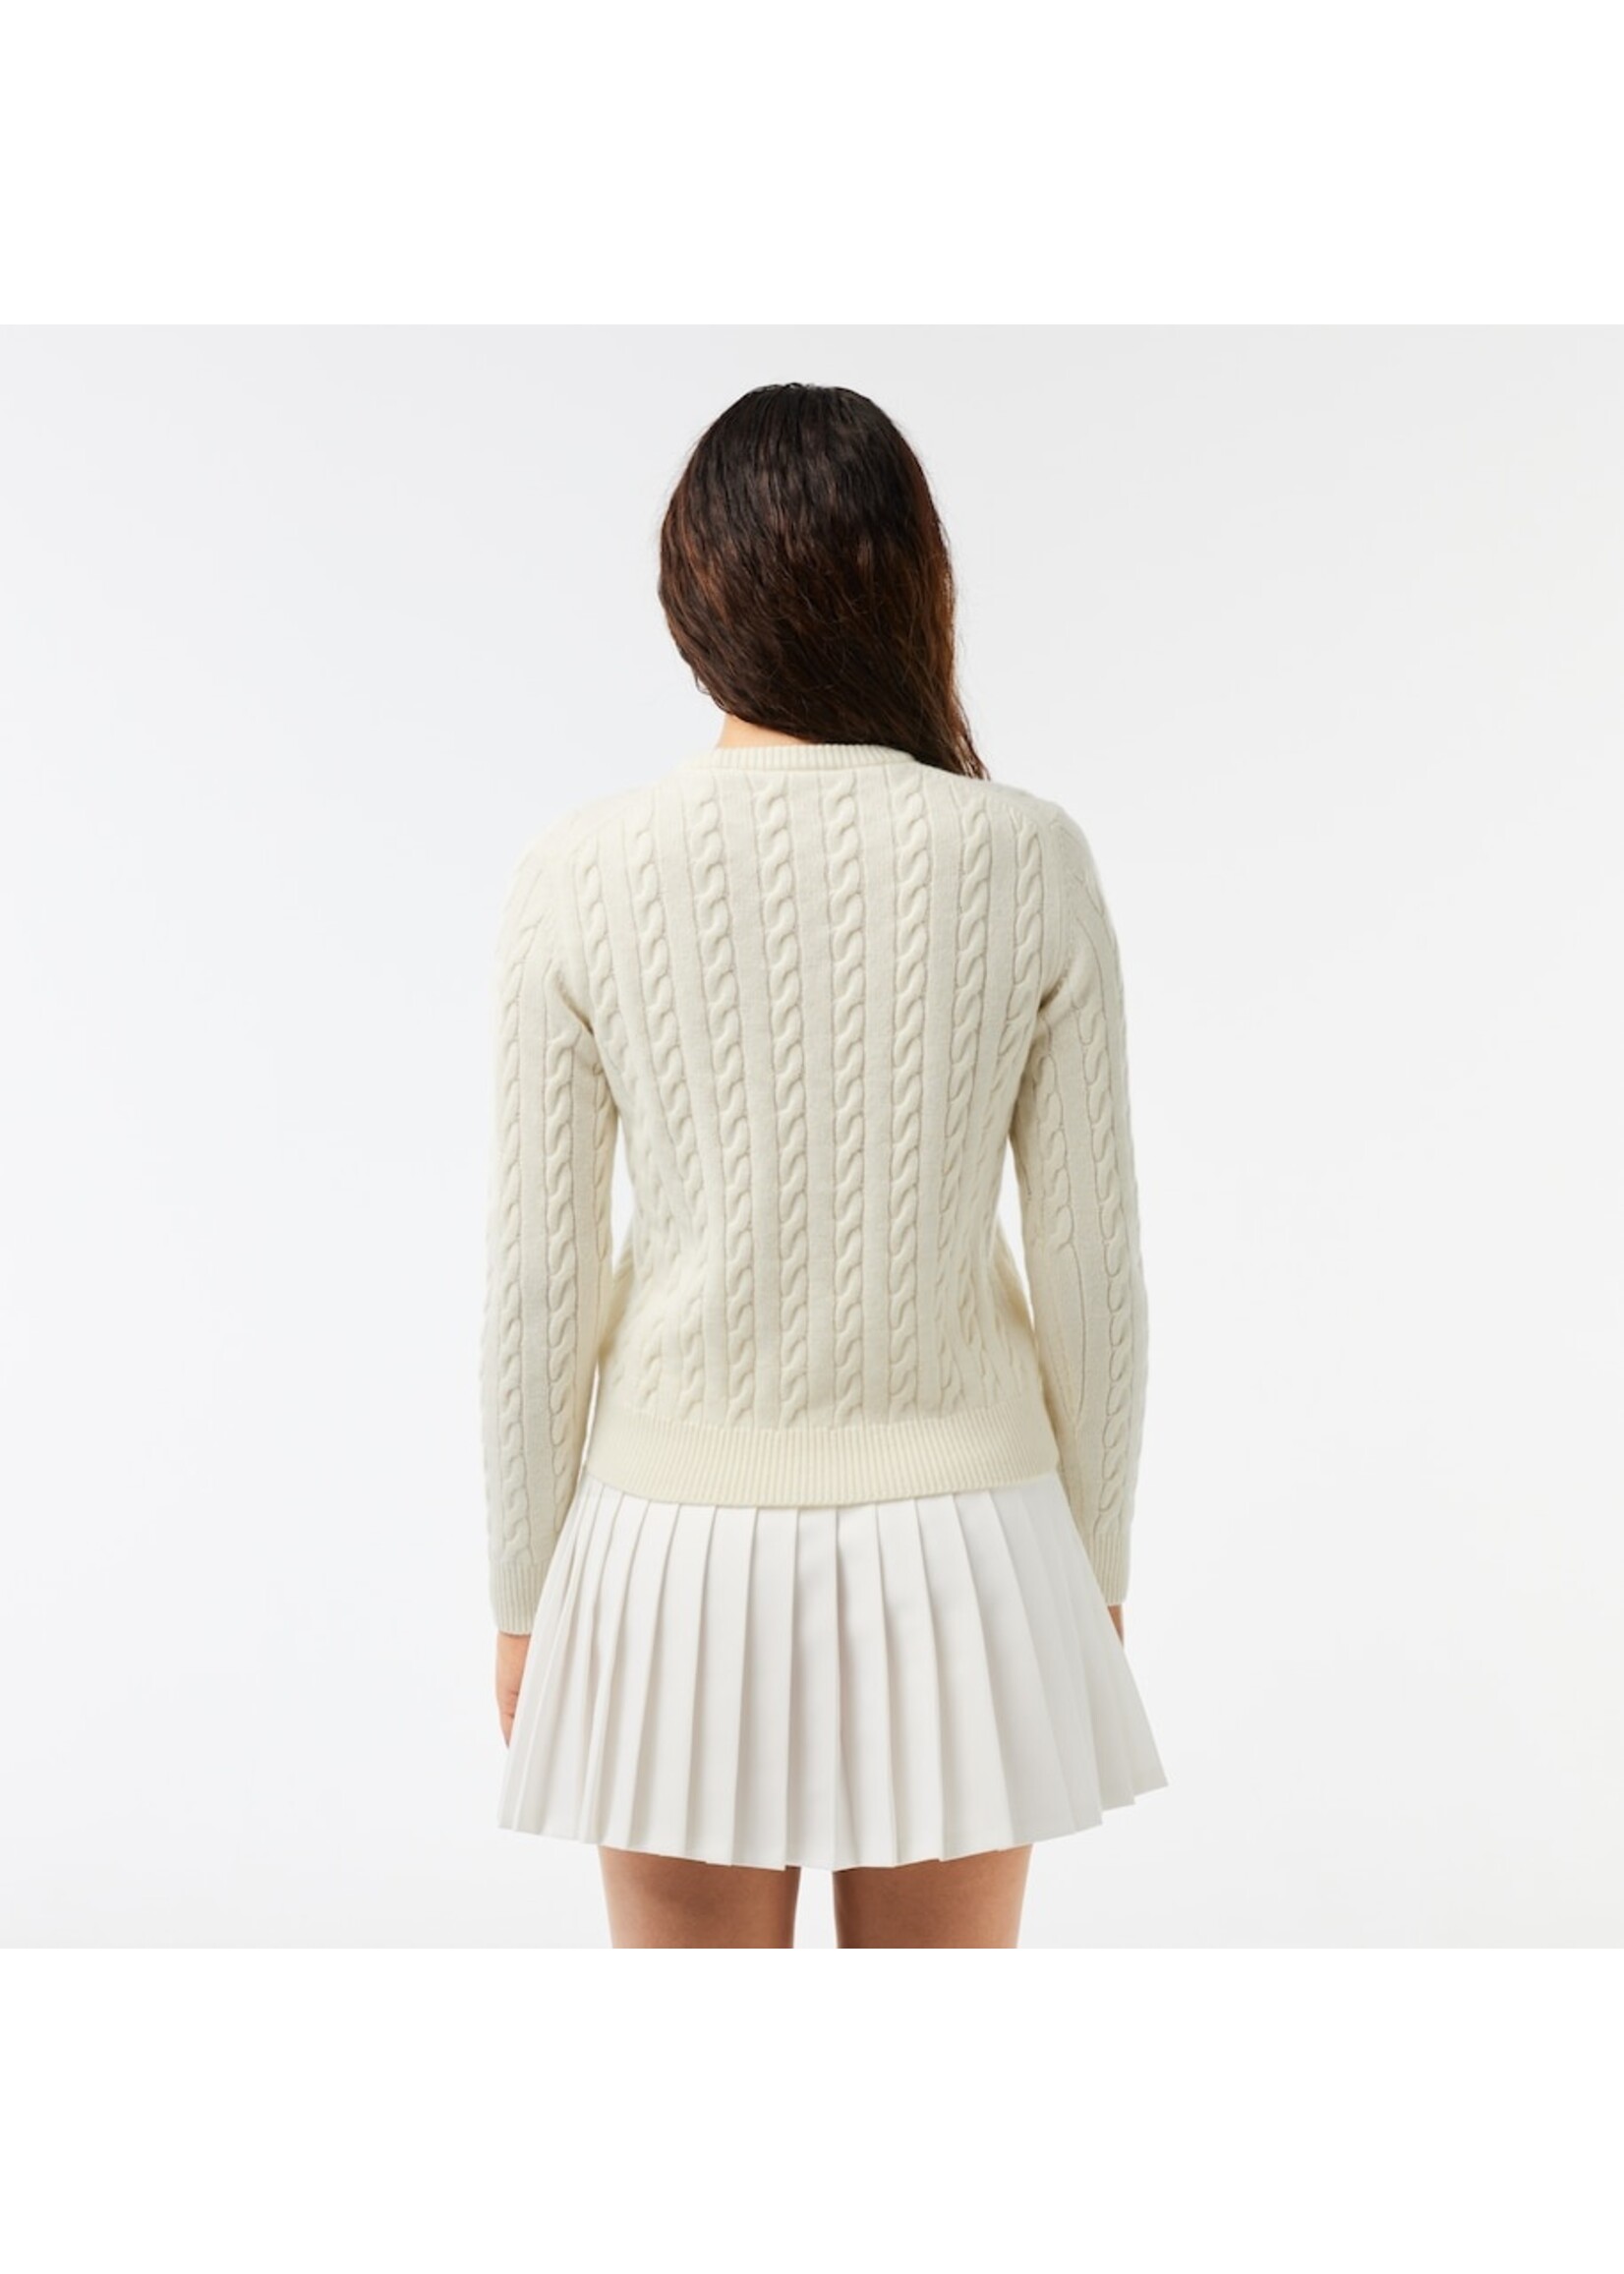 LACOSTE Women's Wool Blend Cable Knit Sweater